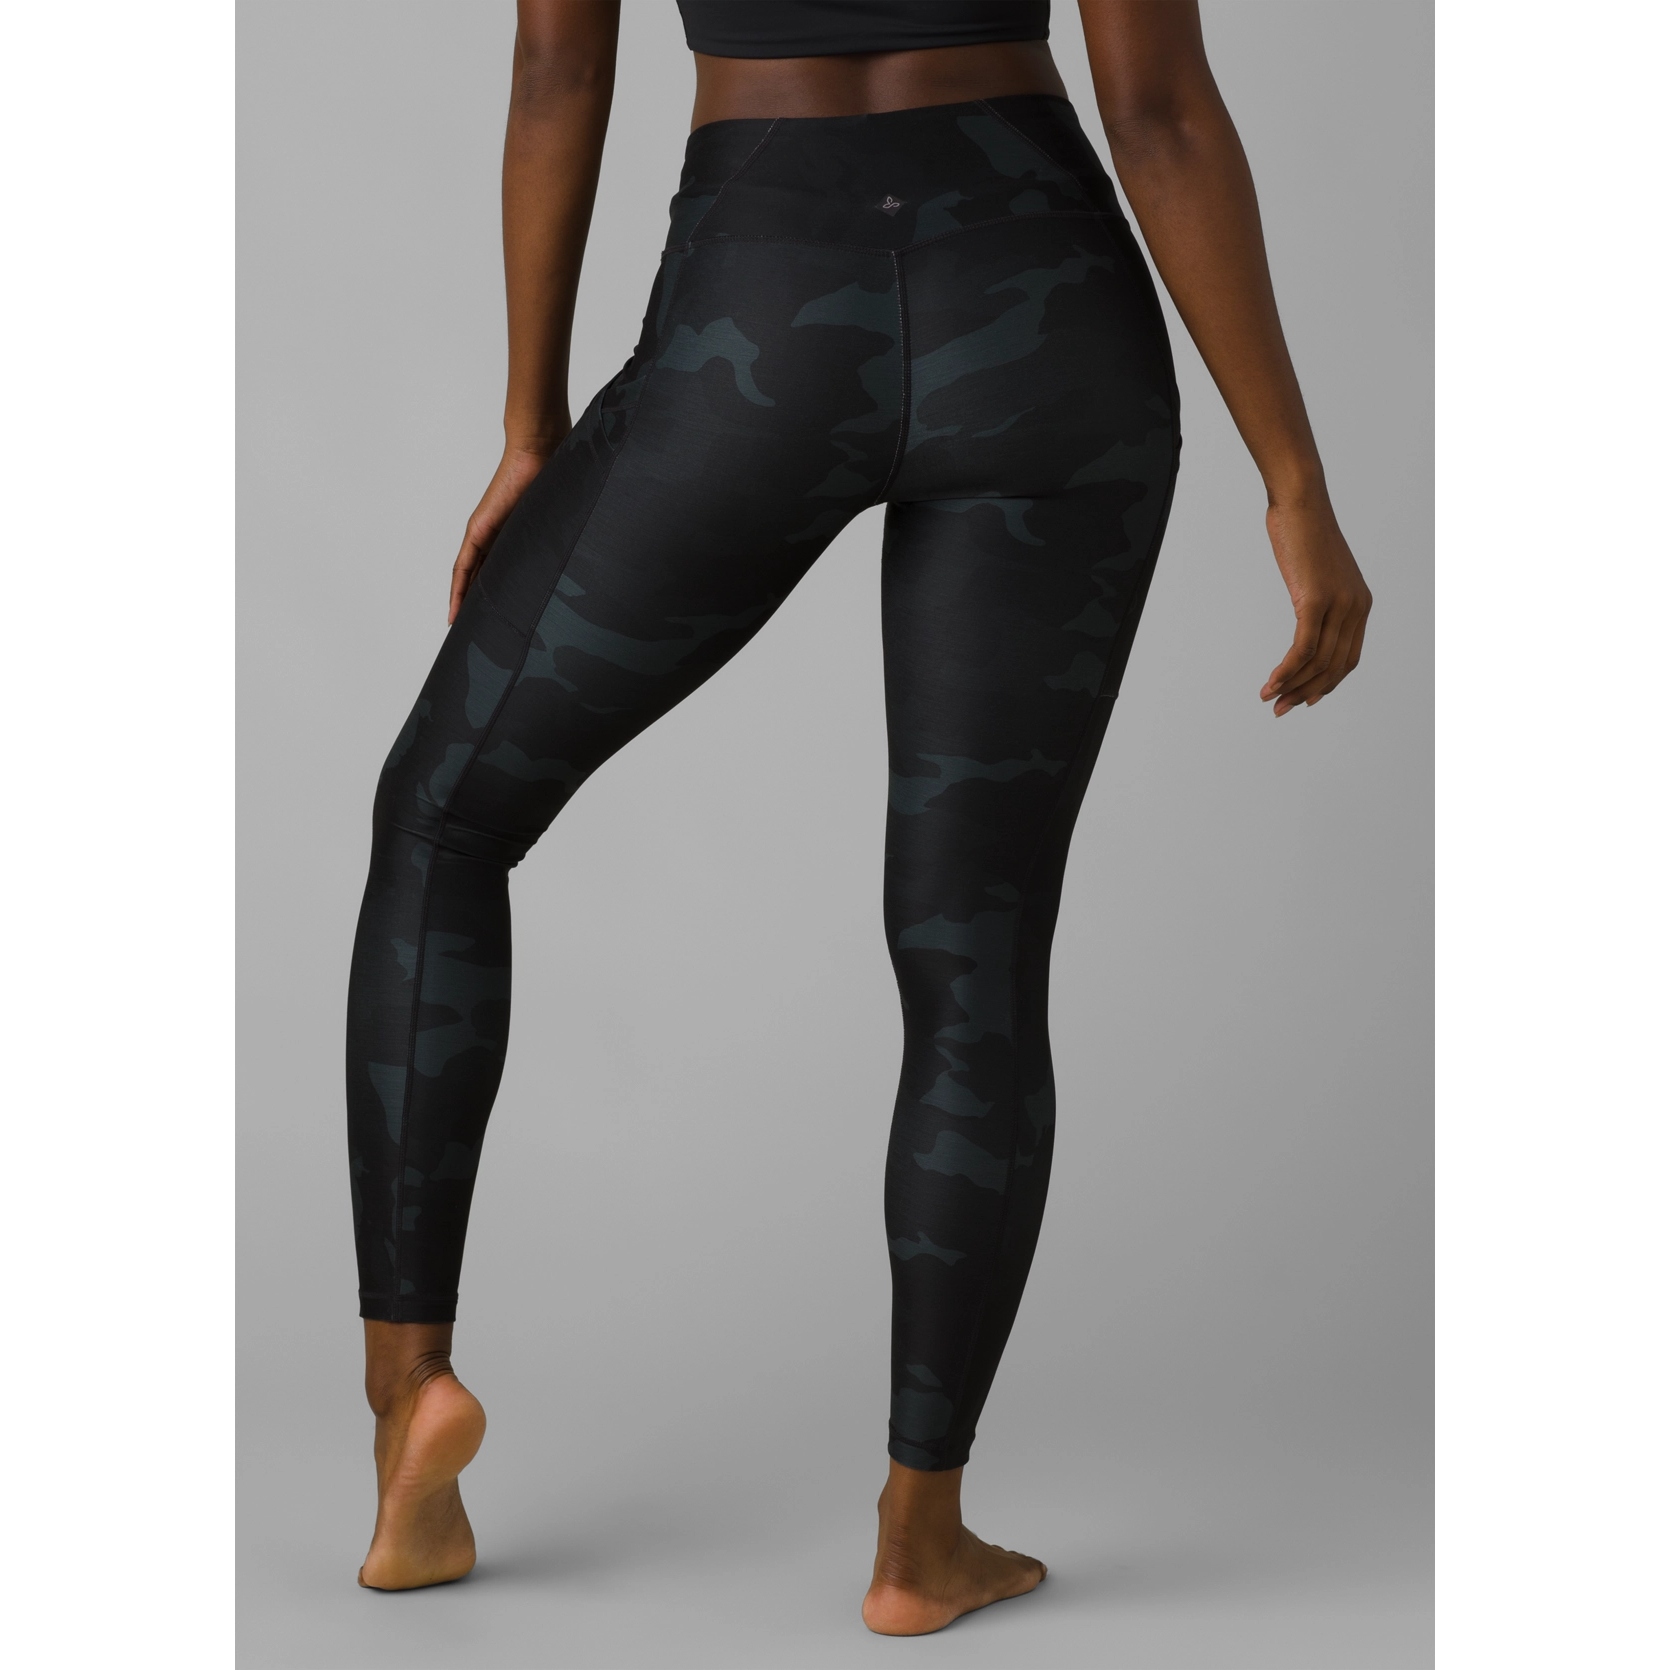 prAna Electa Legging II - Women's, Large, Black Camo, — Womens Clothing  Size: Large, Gender: Female, Age Group: Adults, Apparel Application: Casual  — 1971371-002-L — 66% Off - 1 out of 12 models